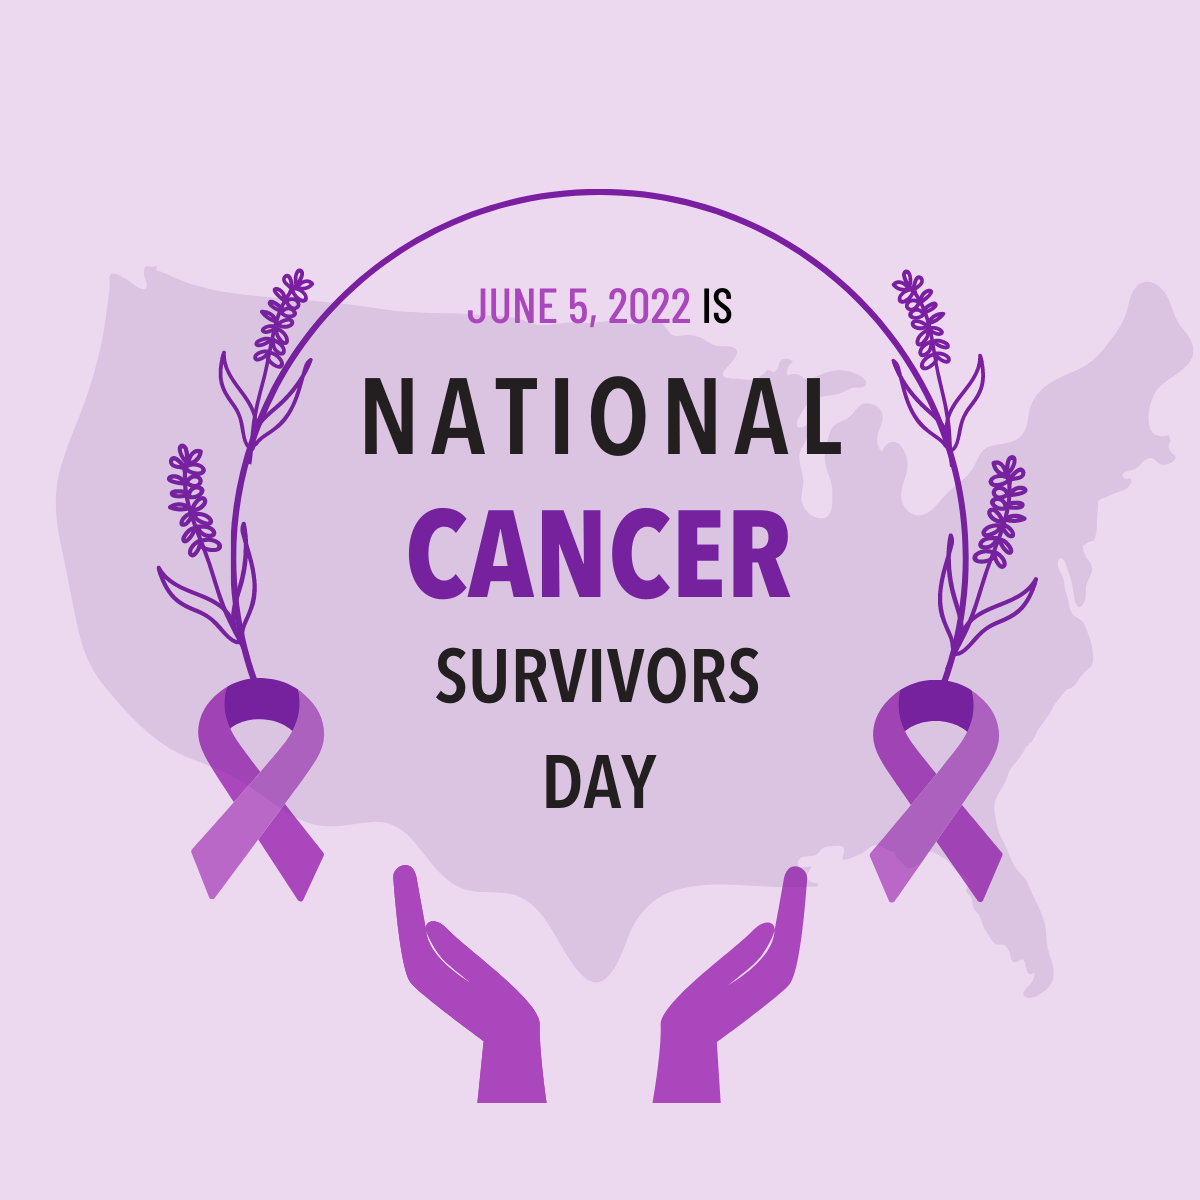 June is National Cancer Survivorship Month—what are we doing to support our  survivors?